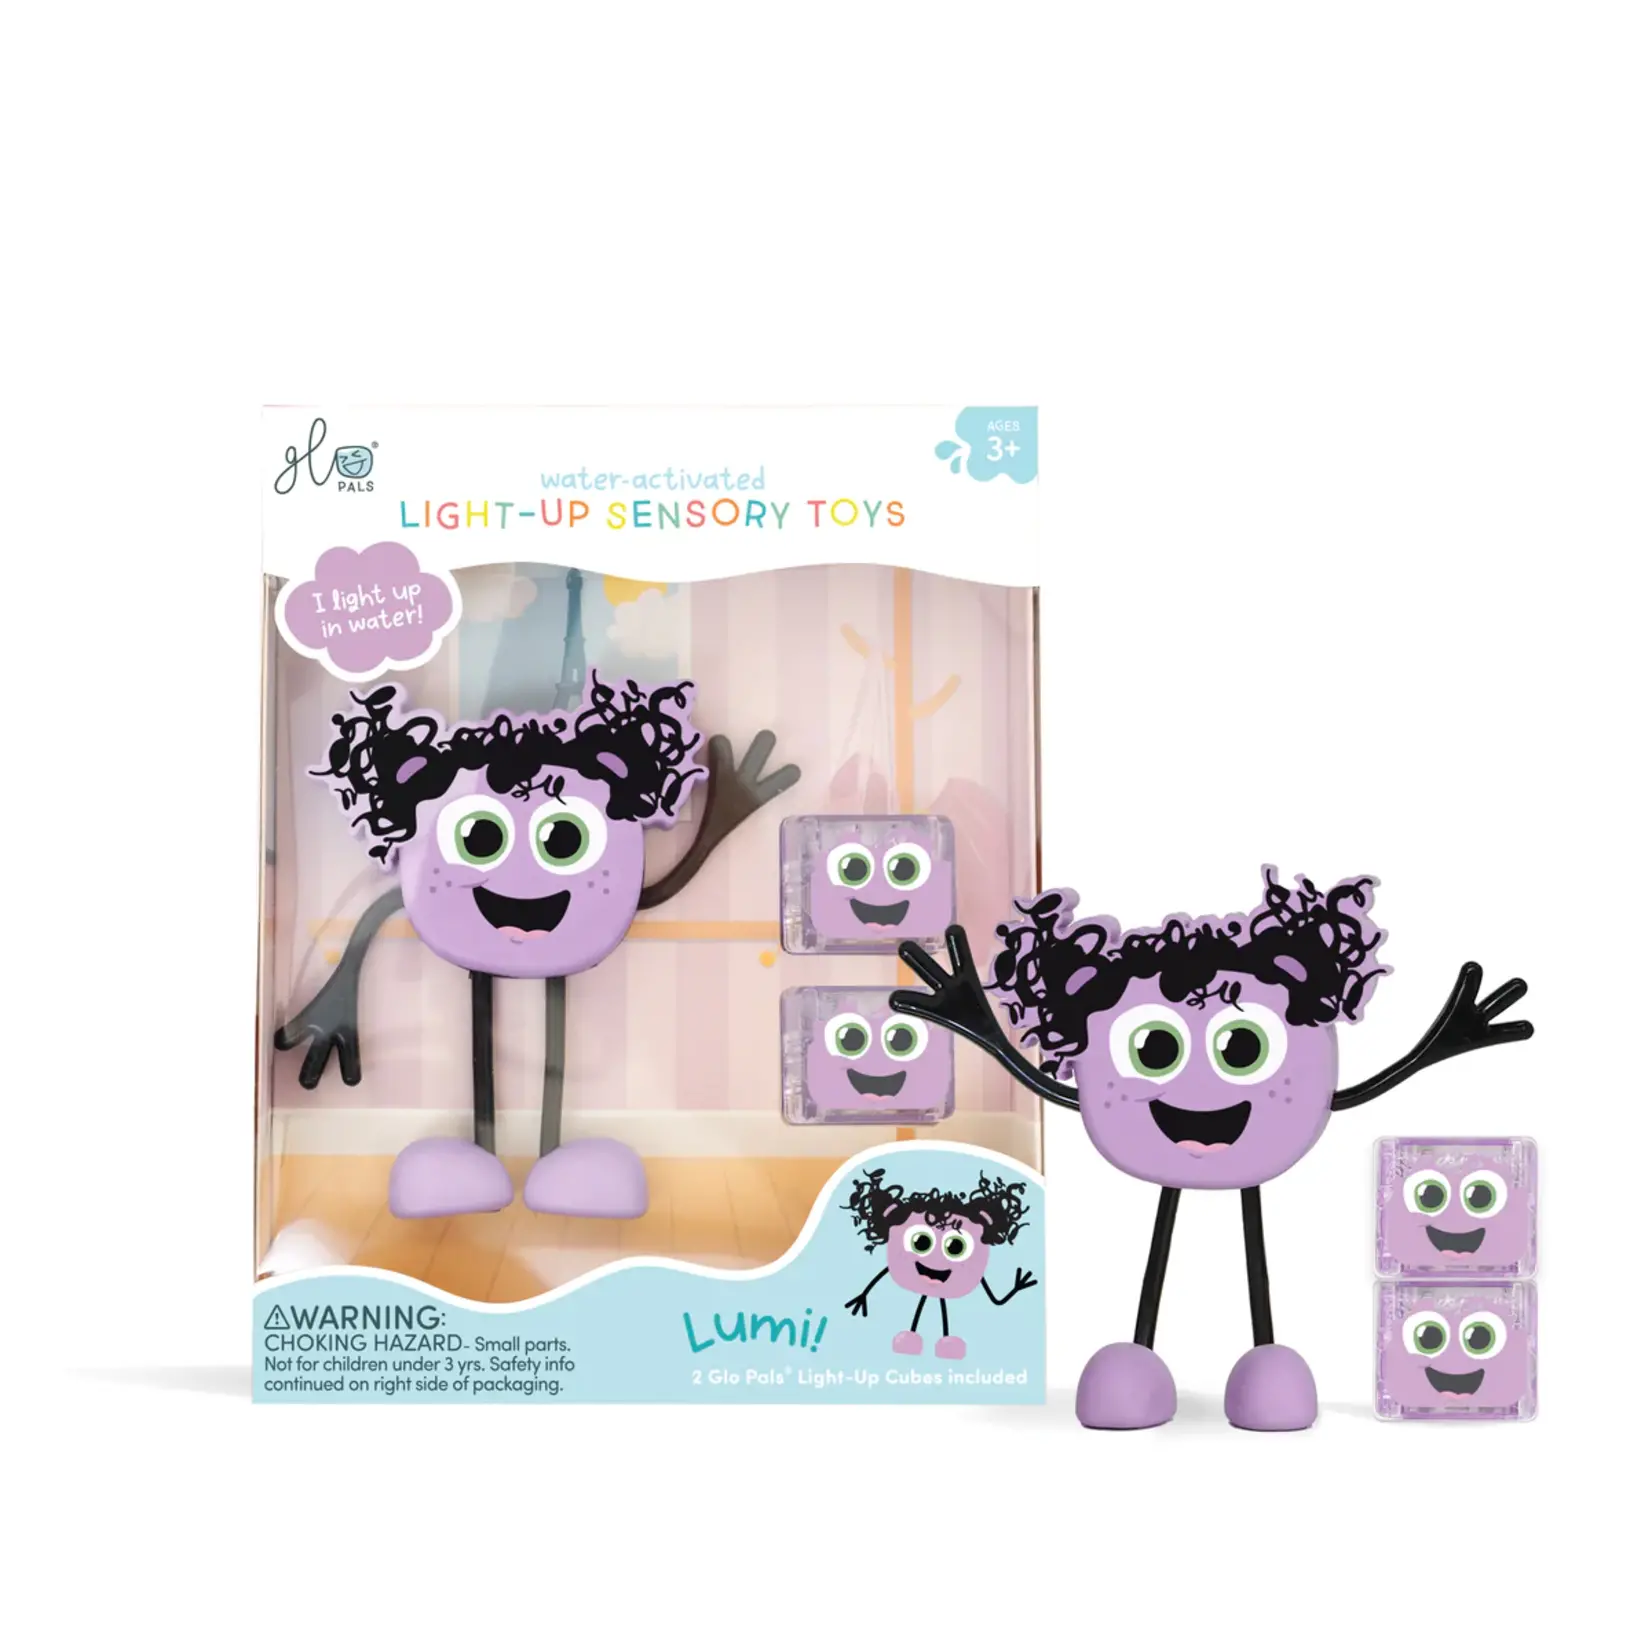 Glo Pals GLO PALS NEW LIGHT UP CHARACTERS